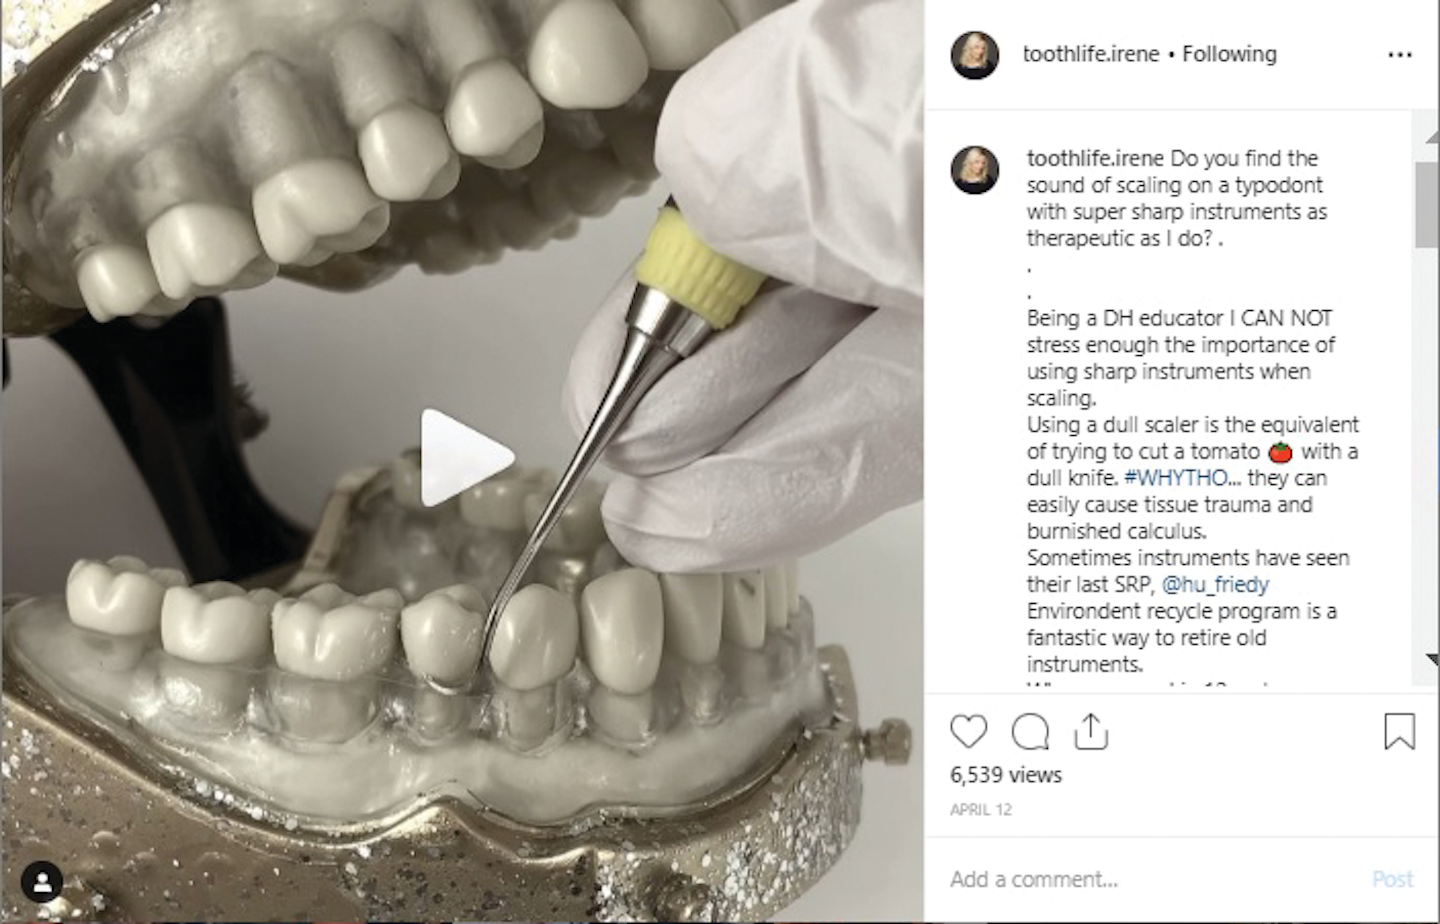 Instafamous Advice And Warnings From The Instagram Elite Dental